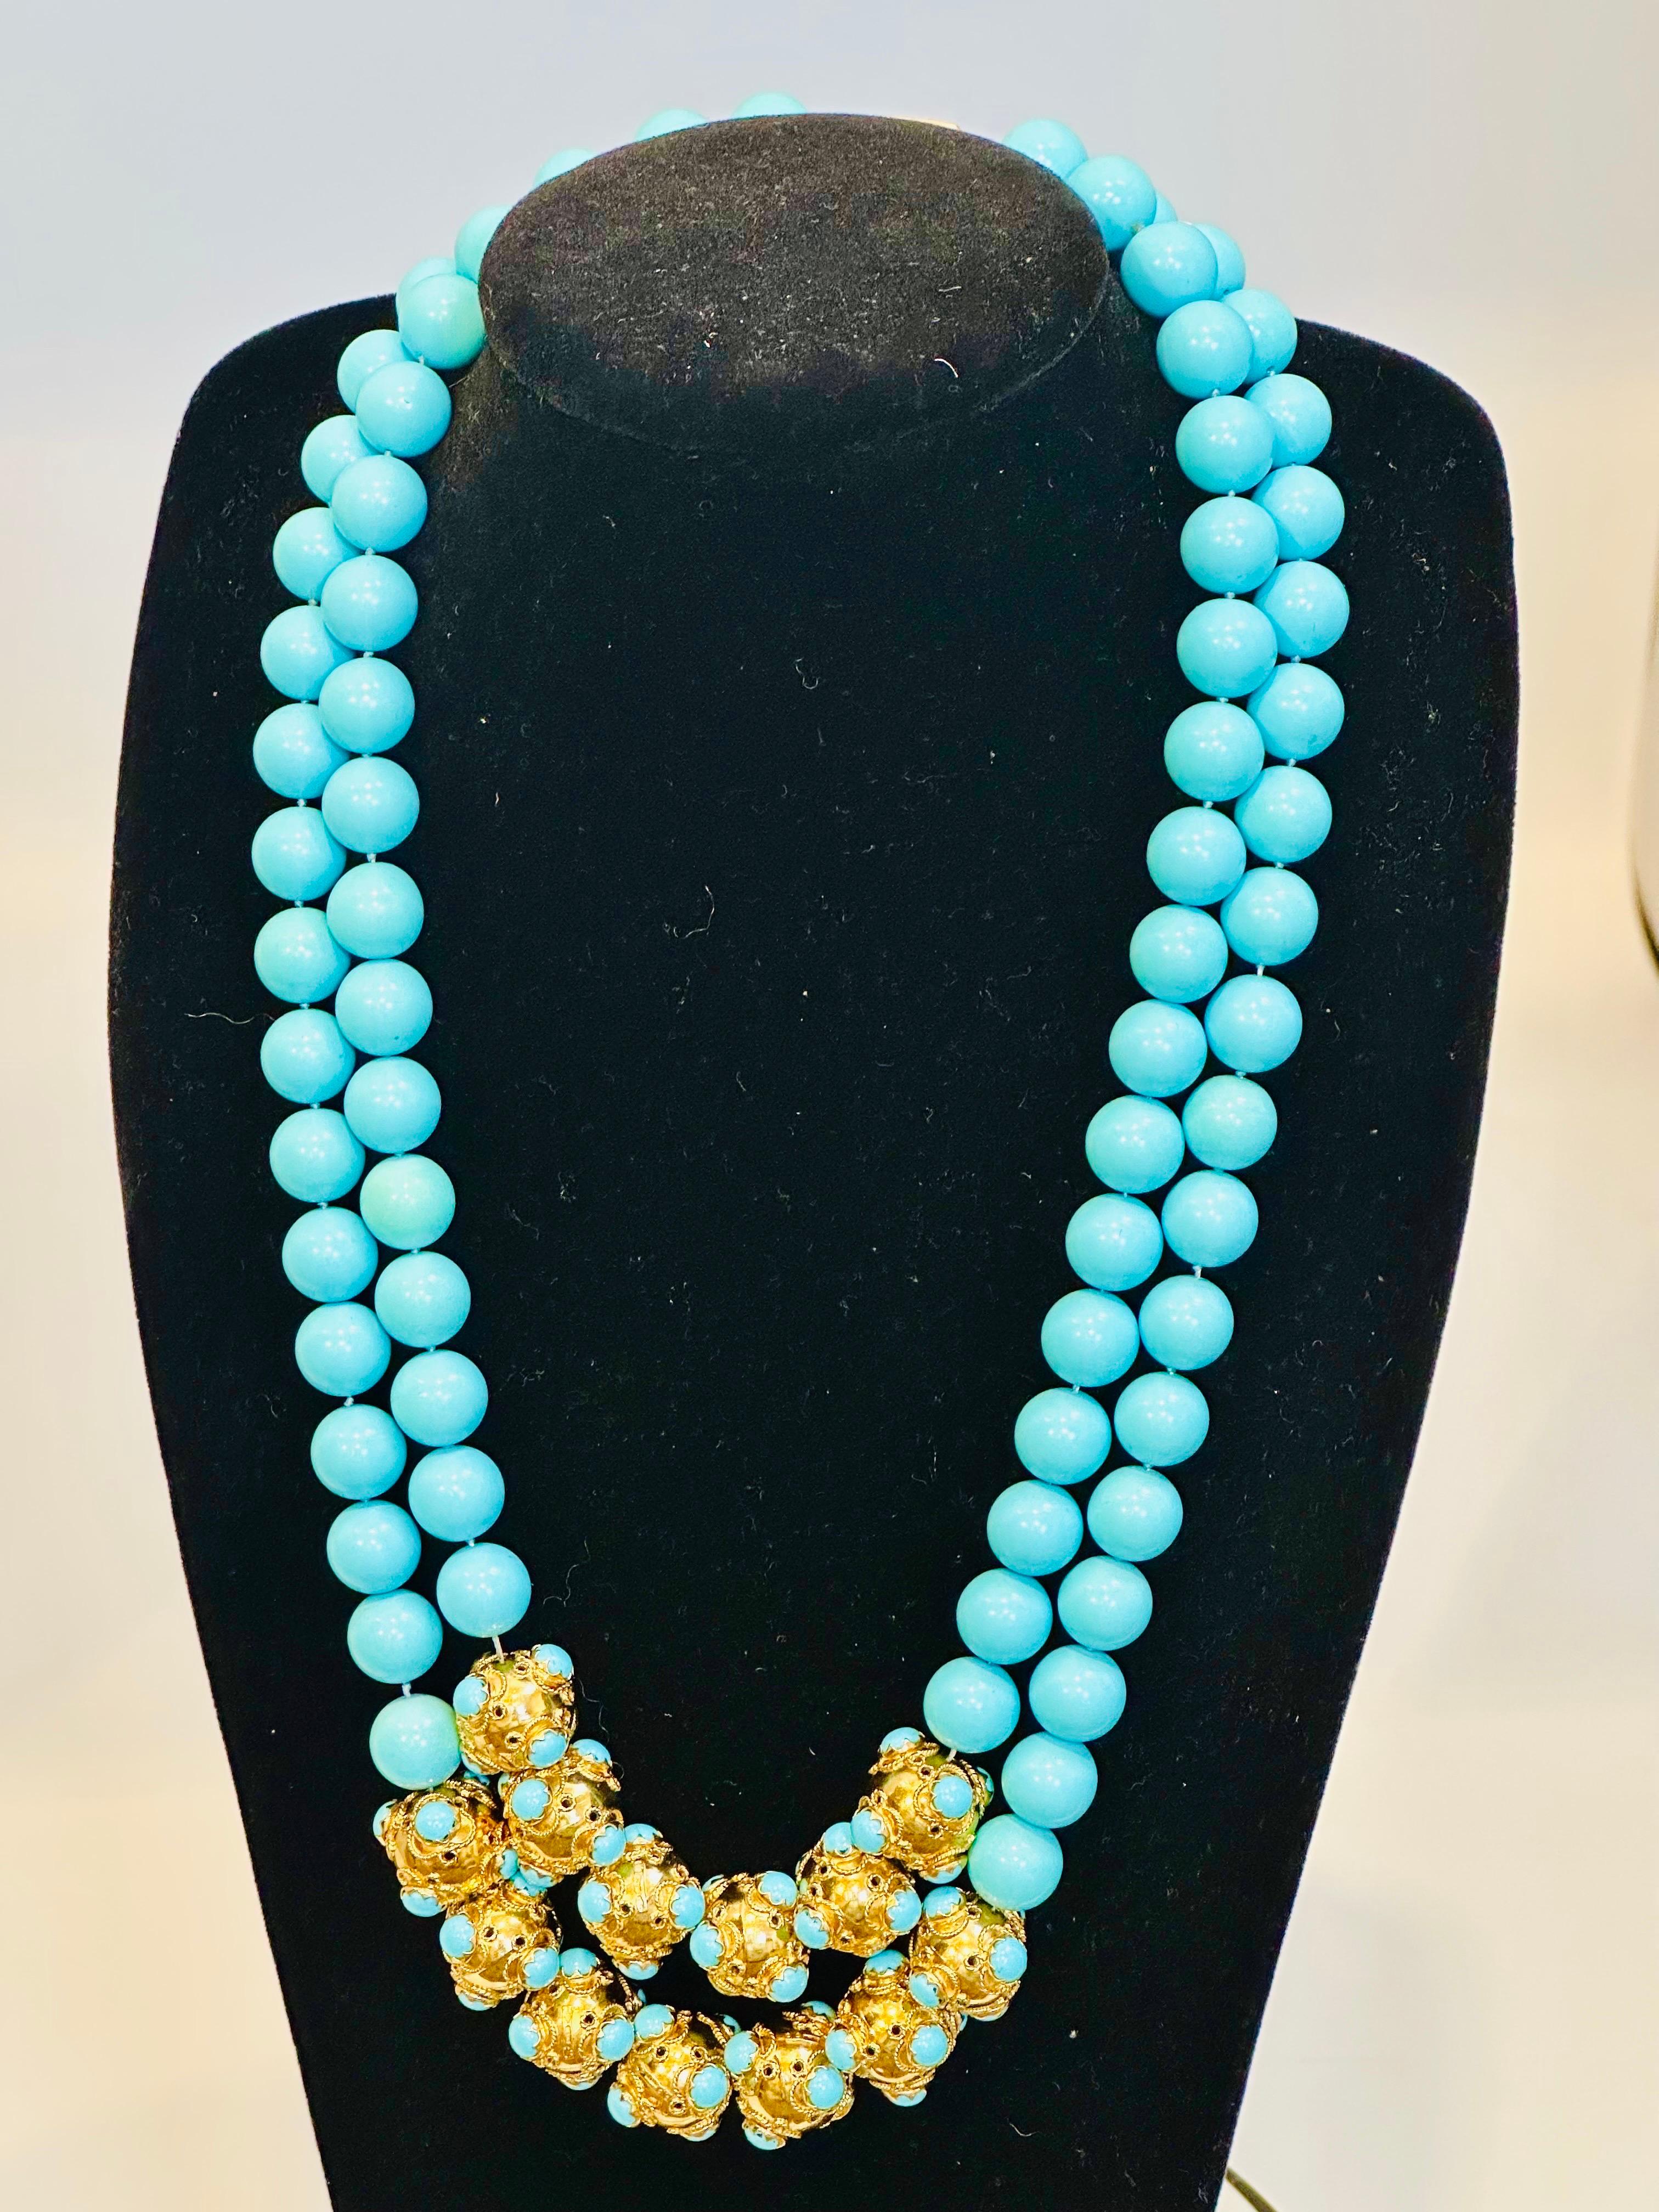 Vintage 600 Ct Natural Sleeping Beauty Turquoise Necklace, Two Strand 18 Kt Gold 4